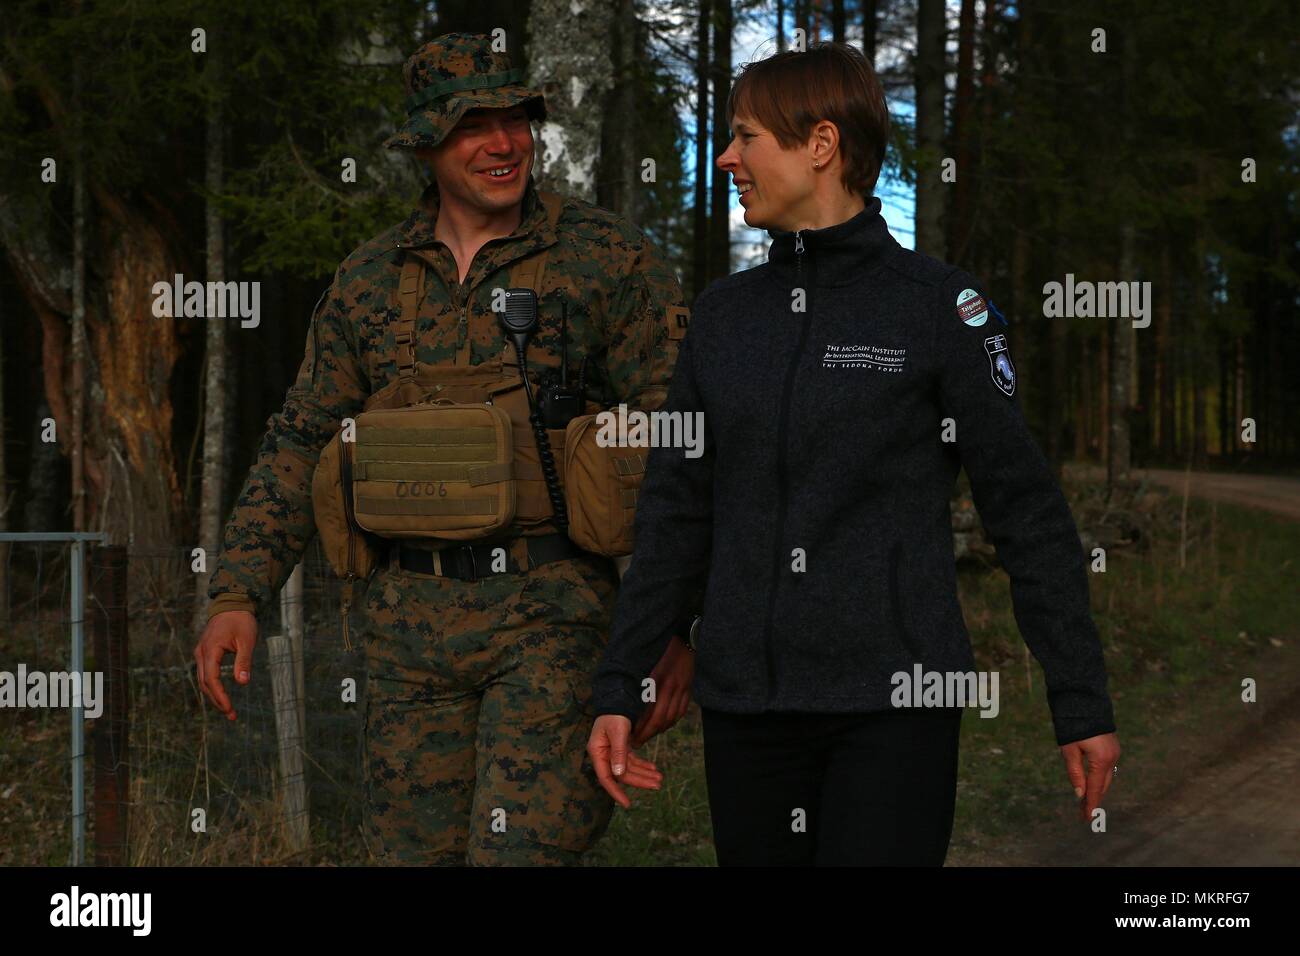 The President of Estonia Kersti Kaljulaid discusses Exercise Hedgehog with Marine Rotational Force-Europe (MRFE) 18.1 Bravo Company Commander Capt. Andrew Davis at Voru, Estonia, May 5, 2018, May 5, 2018. President Kaljulaid visited Marines and Sailors with MRFE and spoke about the importance of Hedgehog, which is an annual event designed to strengthen strategic cooperation and partnership among participants. This the first time the Marine Corps has participated in the exercise. Several NATO countries also attended Hedgehog this year. (U.S. Marine Corps photo by Gunnery Sgt. Clinton Firstbrook Stock Photo